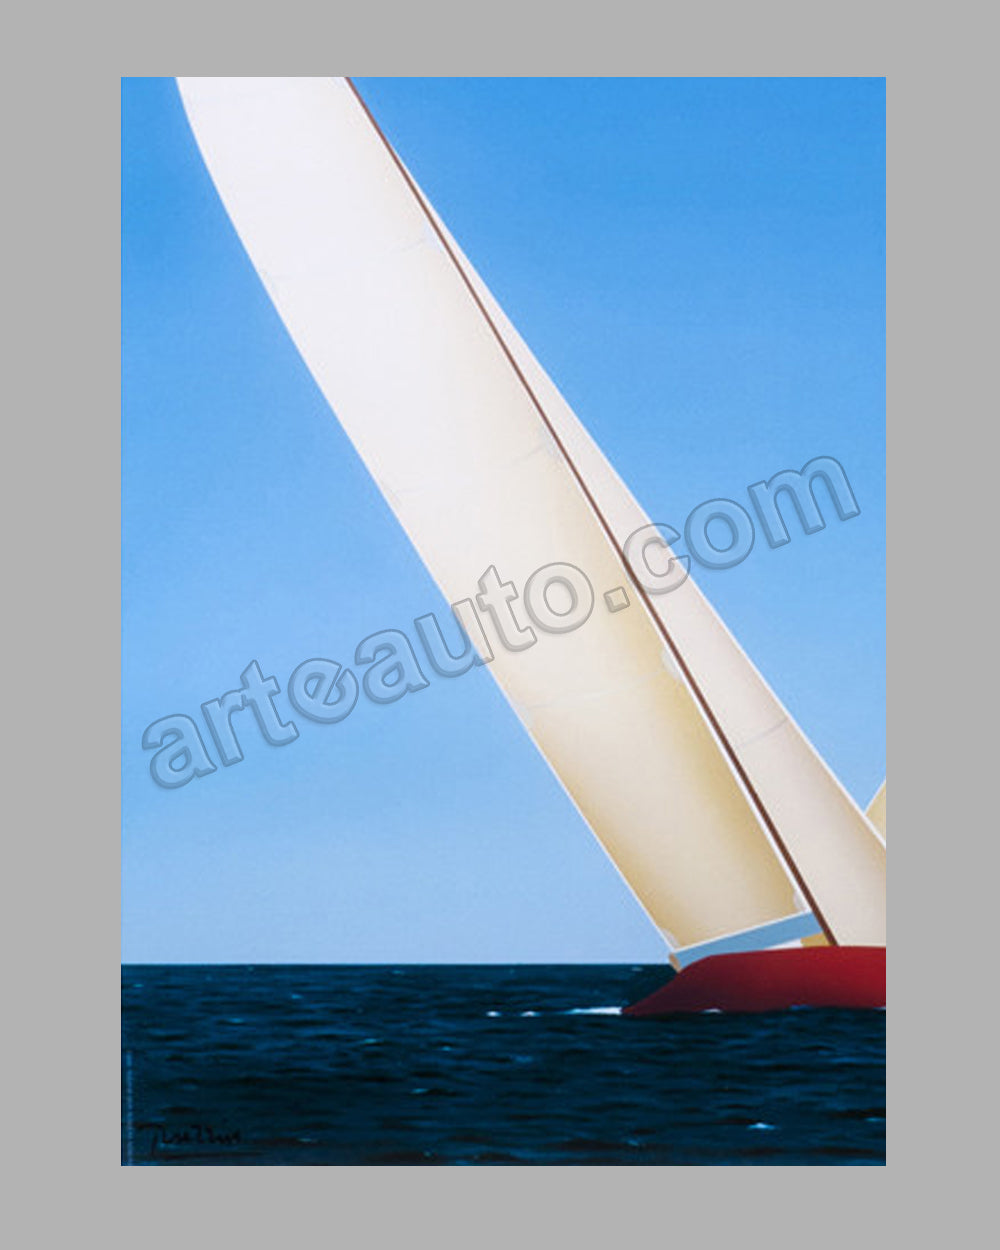 Louis Vuitton Cup 2002/03 large original poster by RazziaTemporarily Out of  Stock$625.00